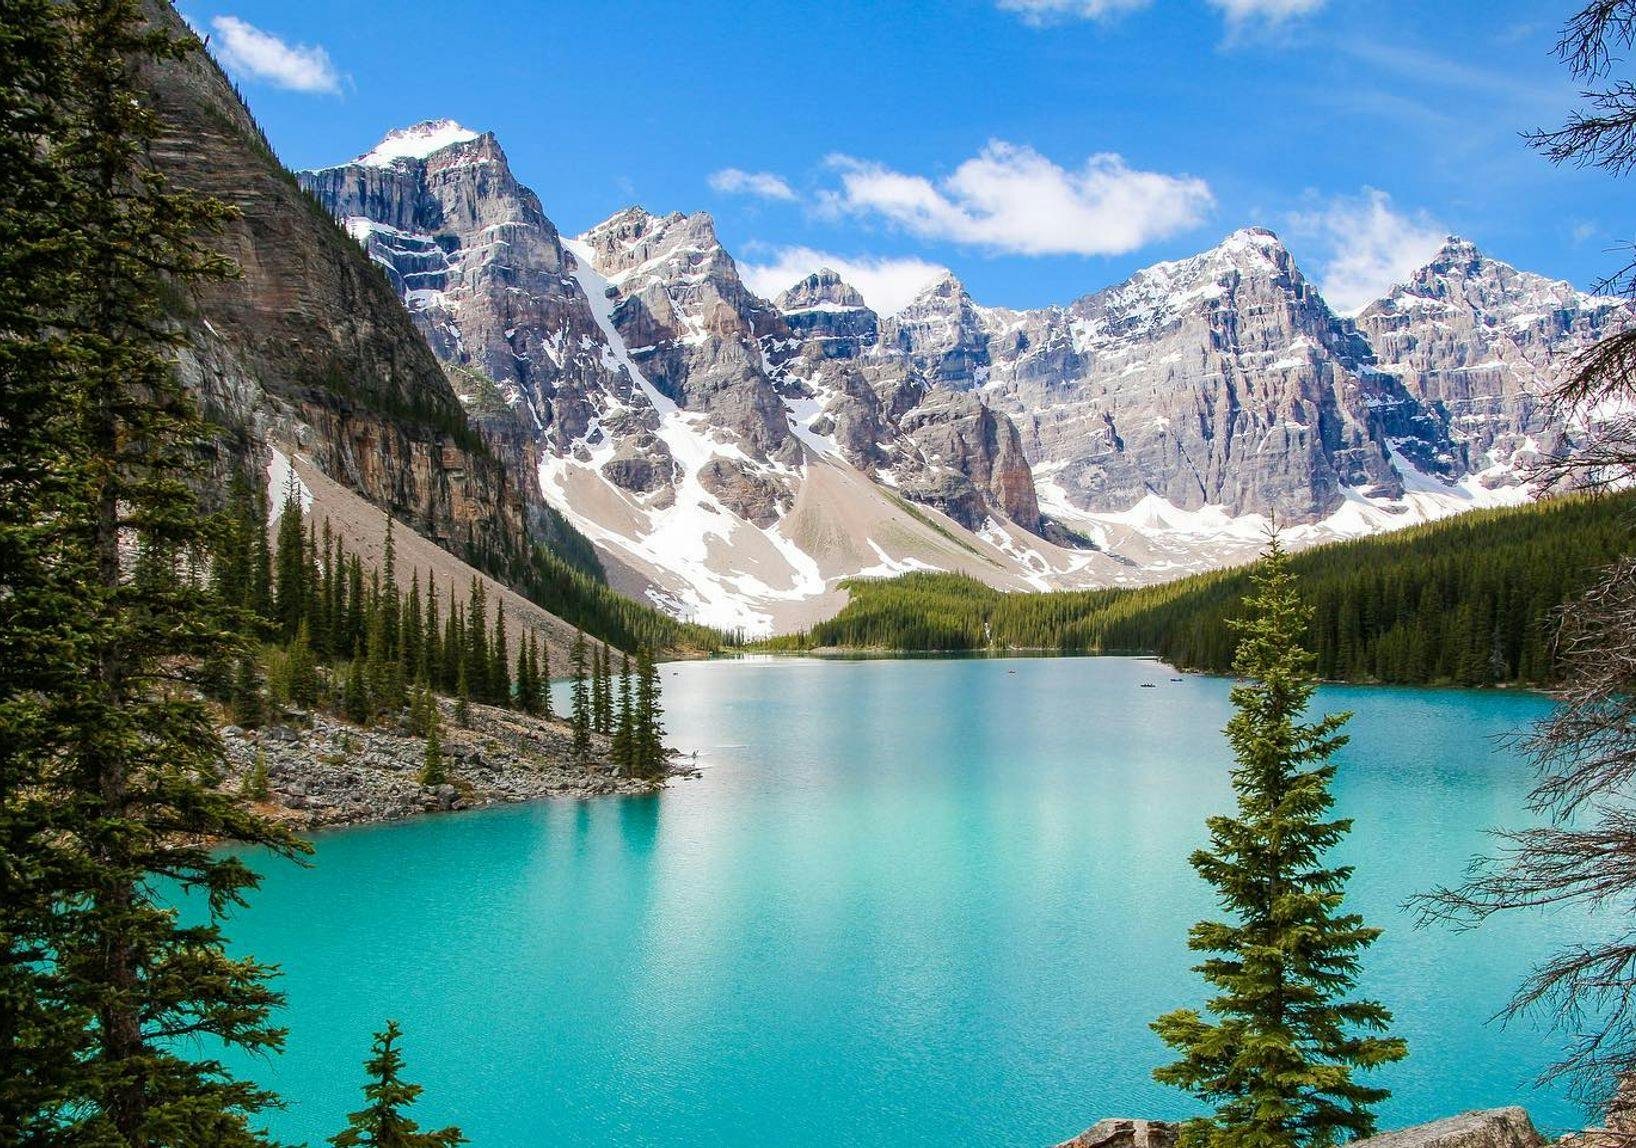 A turquoise lake surrounded by large, snow-capped mountain peaks and tall green trees